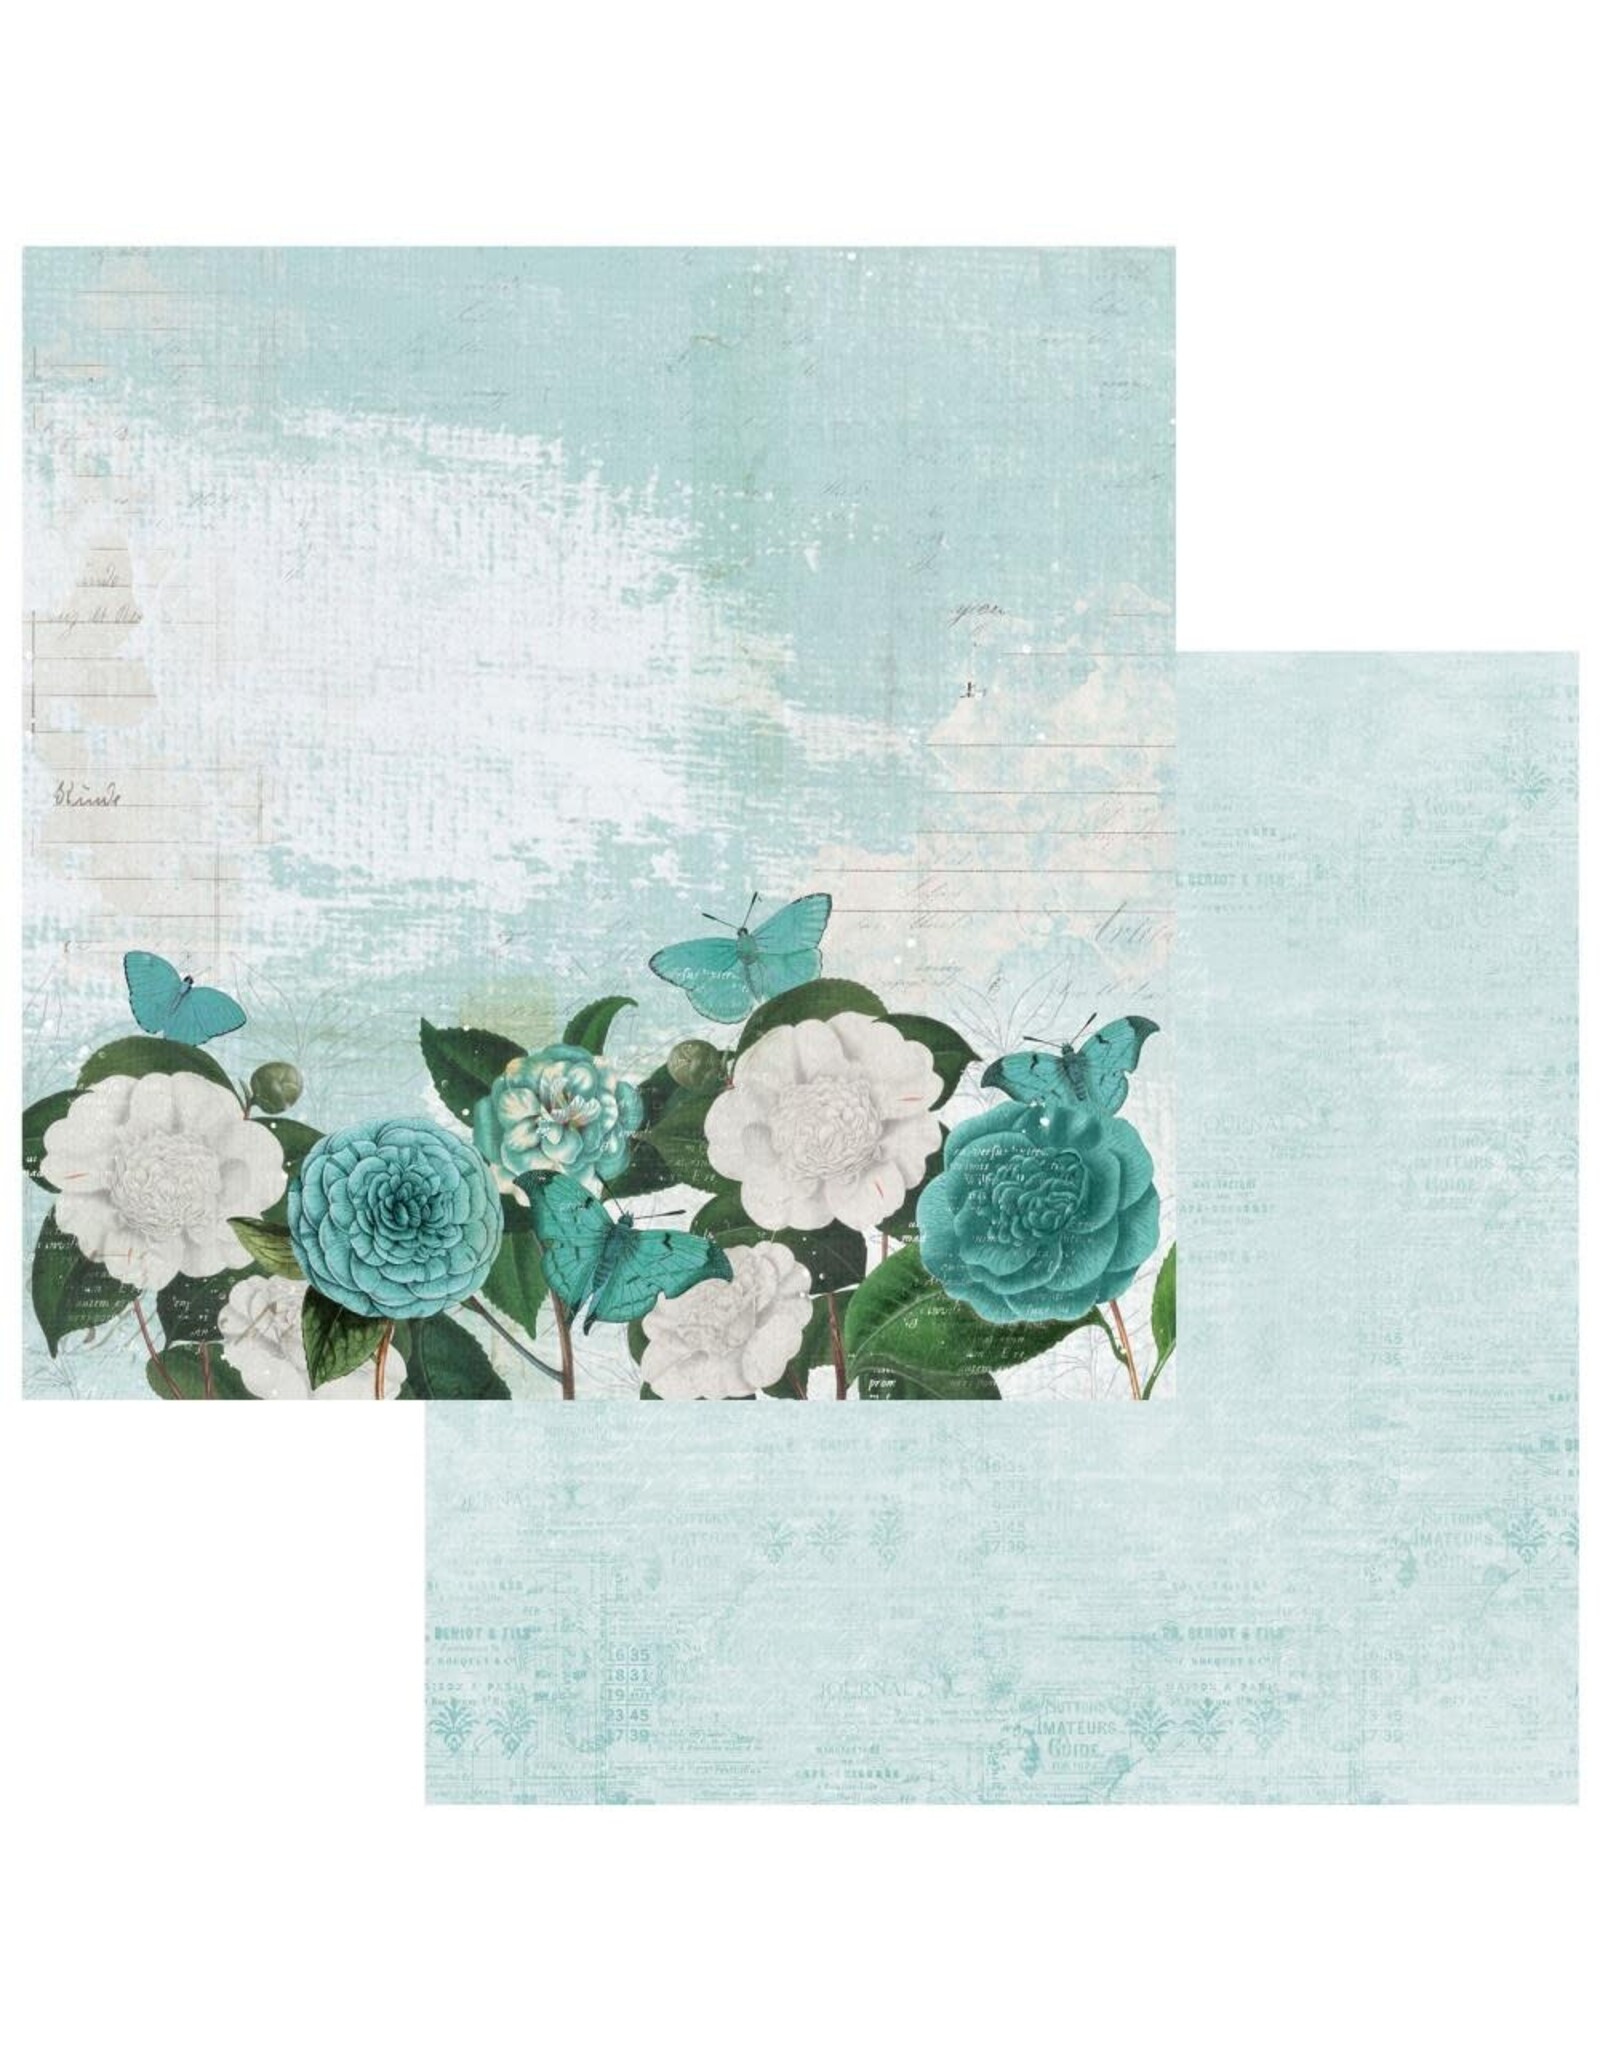 49 AND MARKET Color Swatch Teal 12x12 - #5